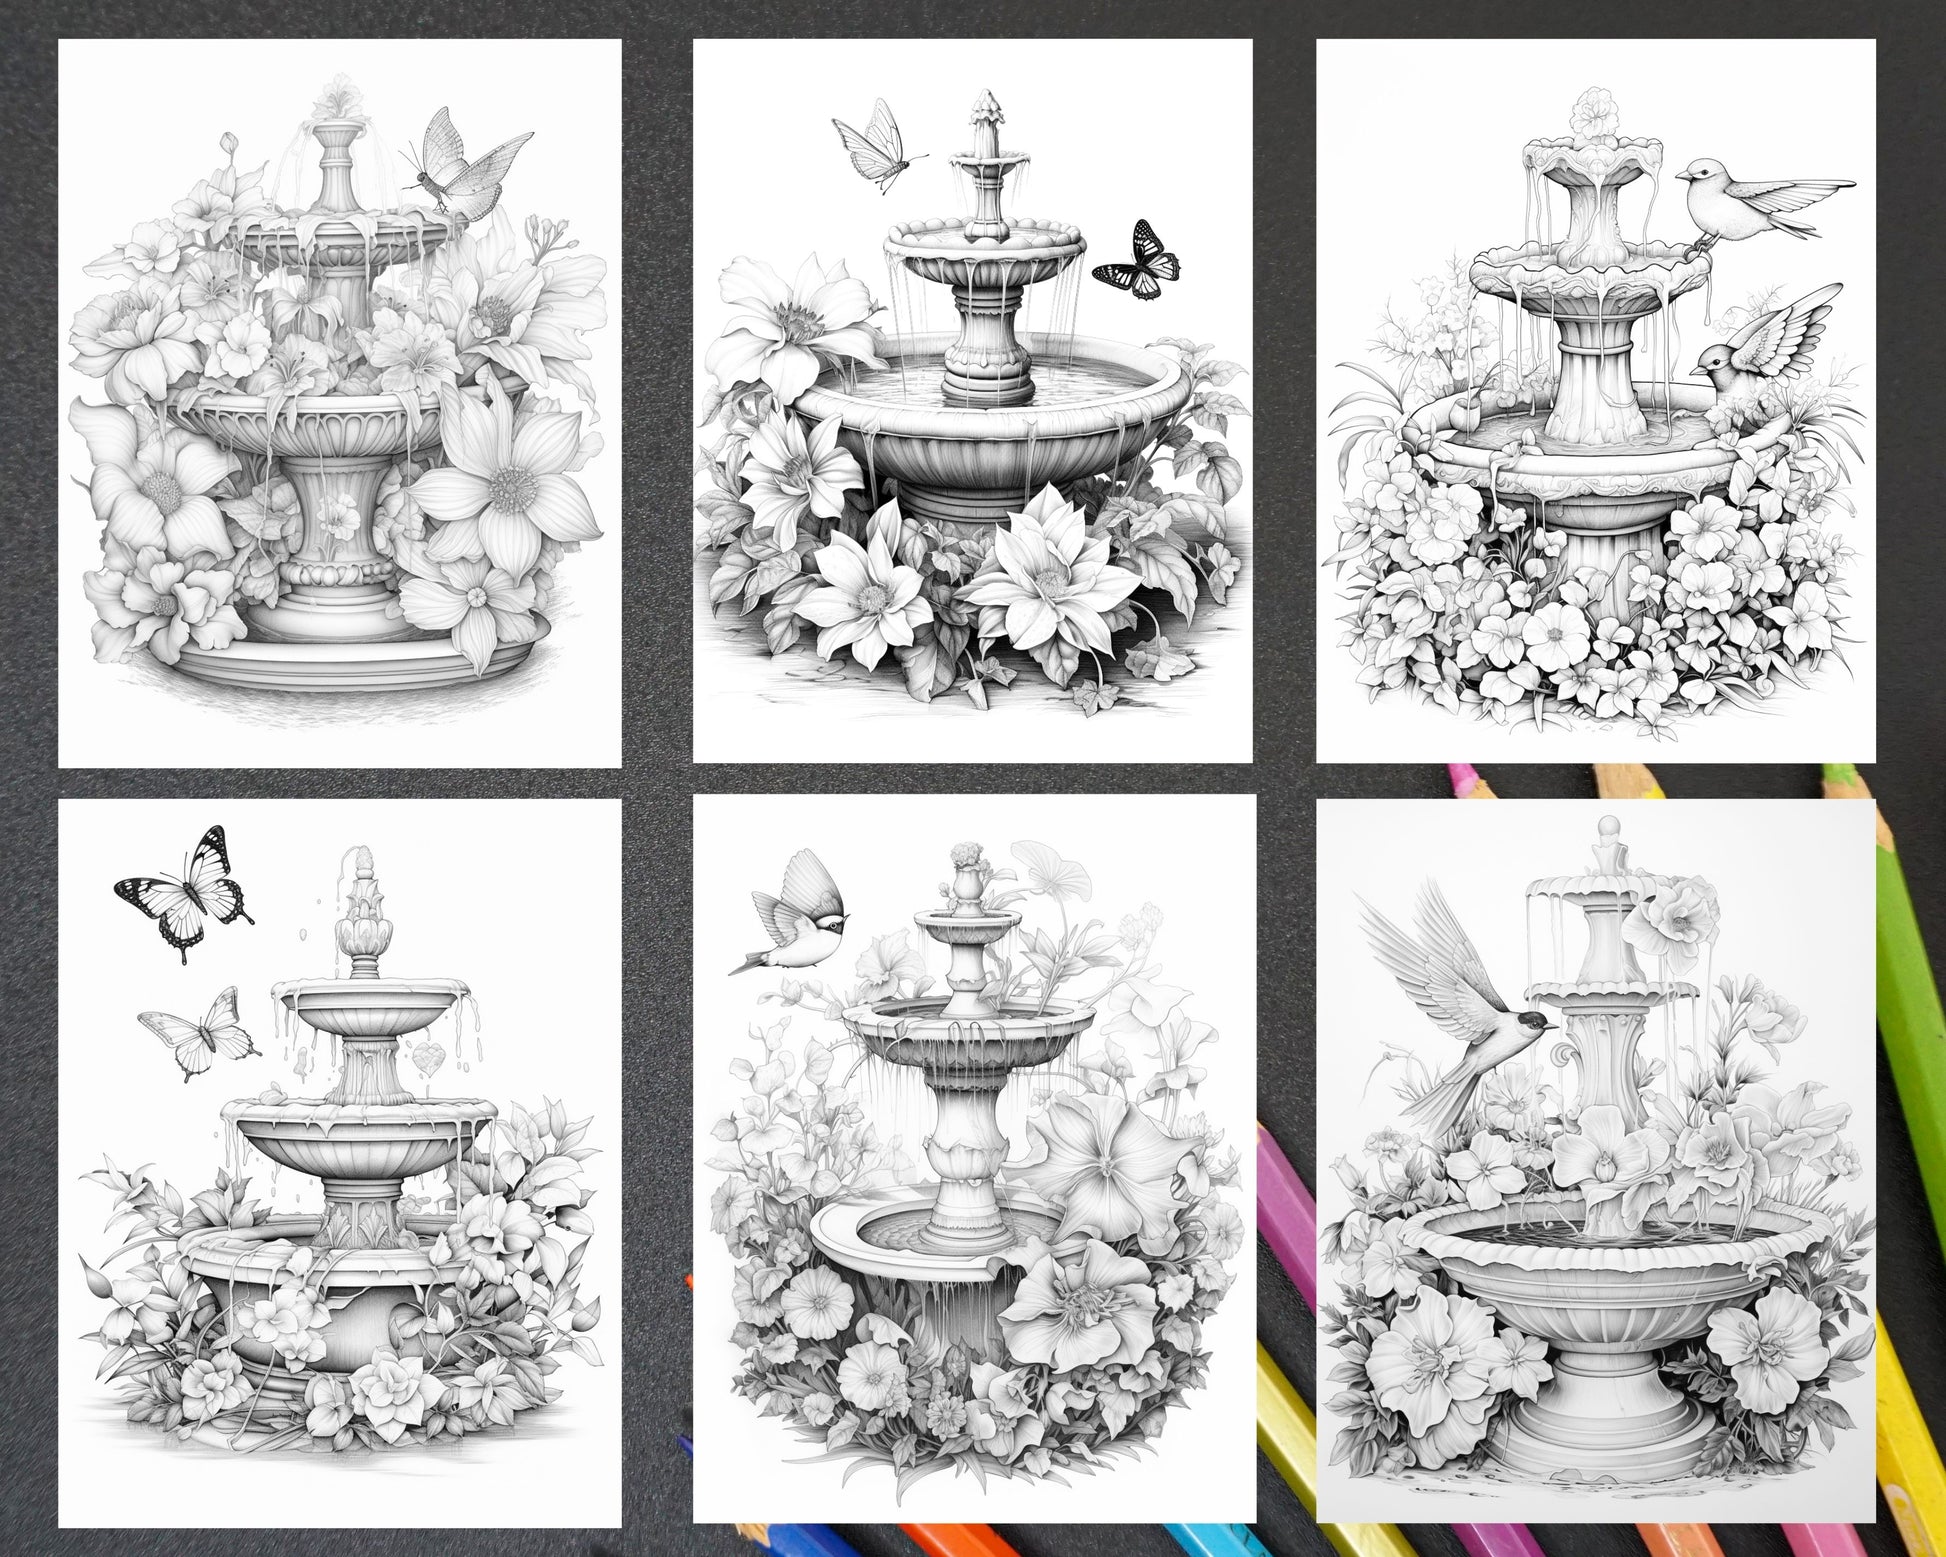 blooming fountains grayscale coloring pages, printable coloring pages for adults, stress relief art, grayscale fountain drawings